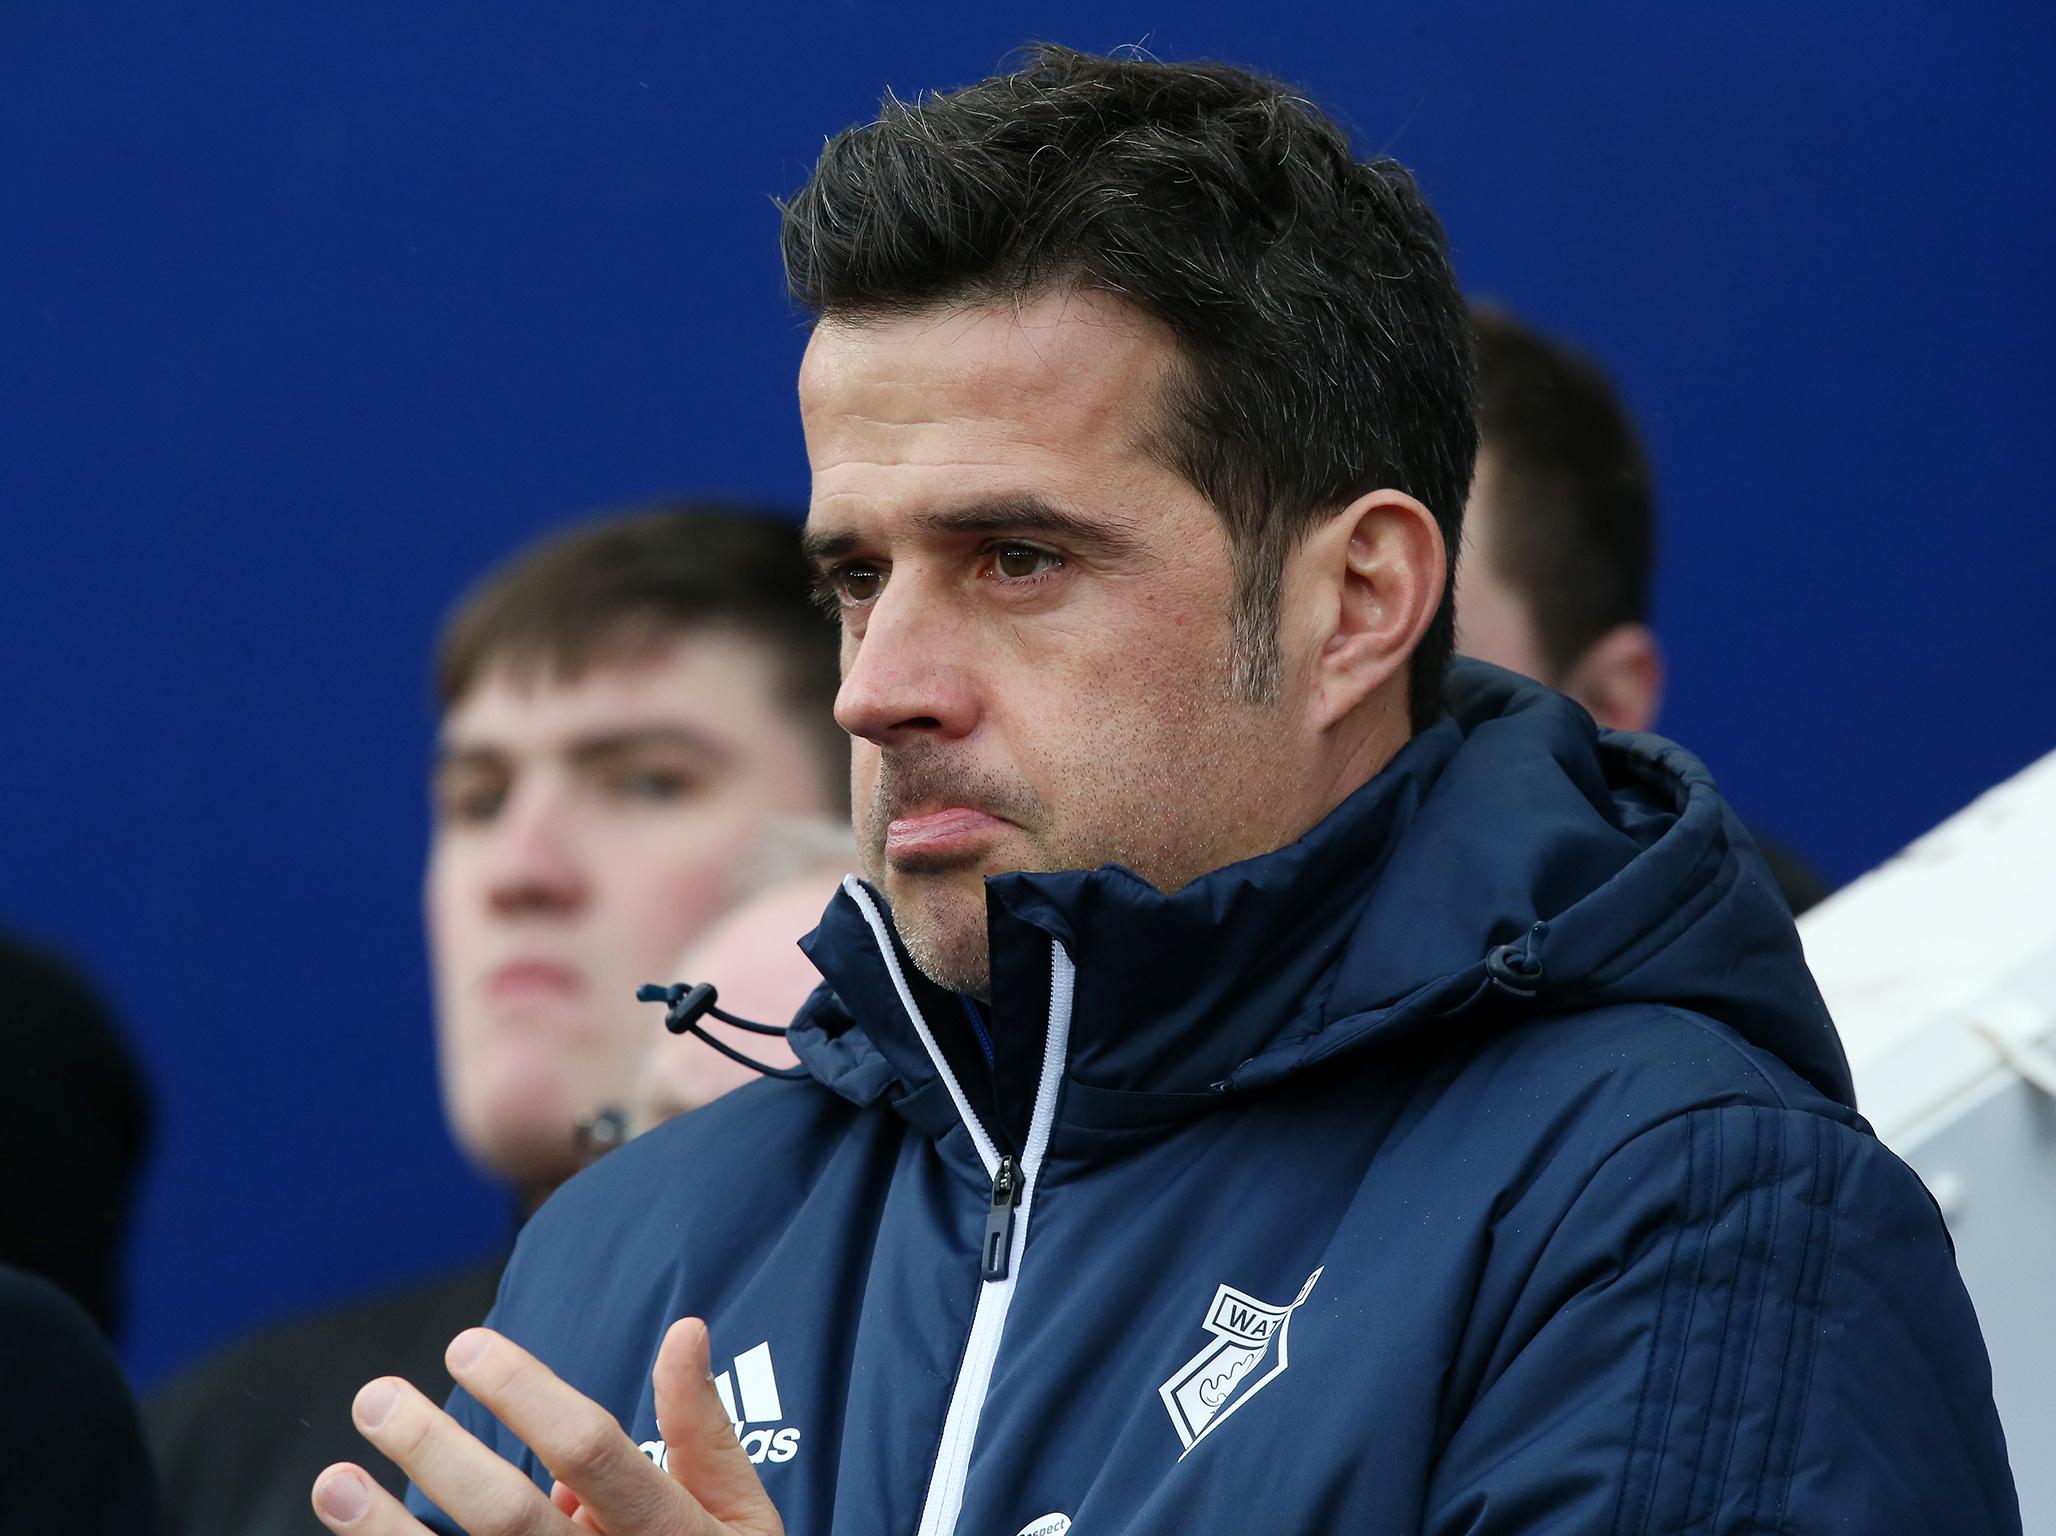 Everton locked in compensation battle with Watford as club close in on appointing Marco Silva